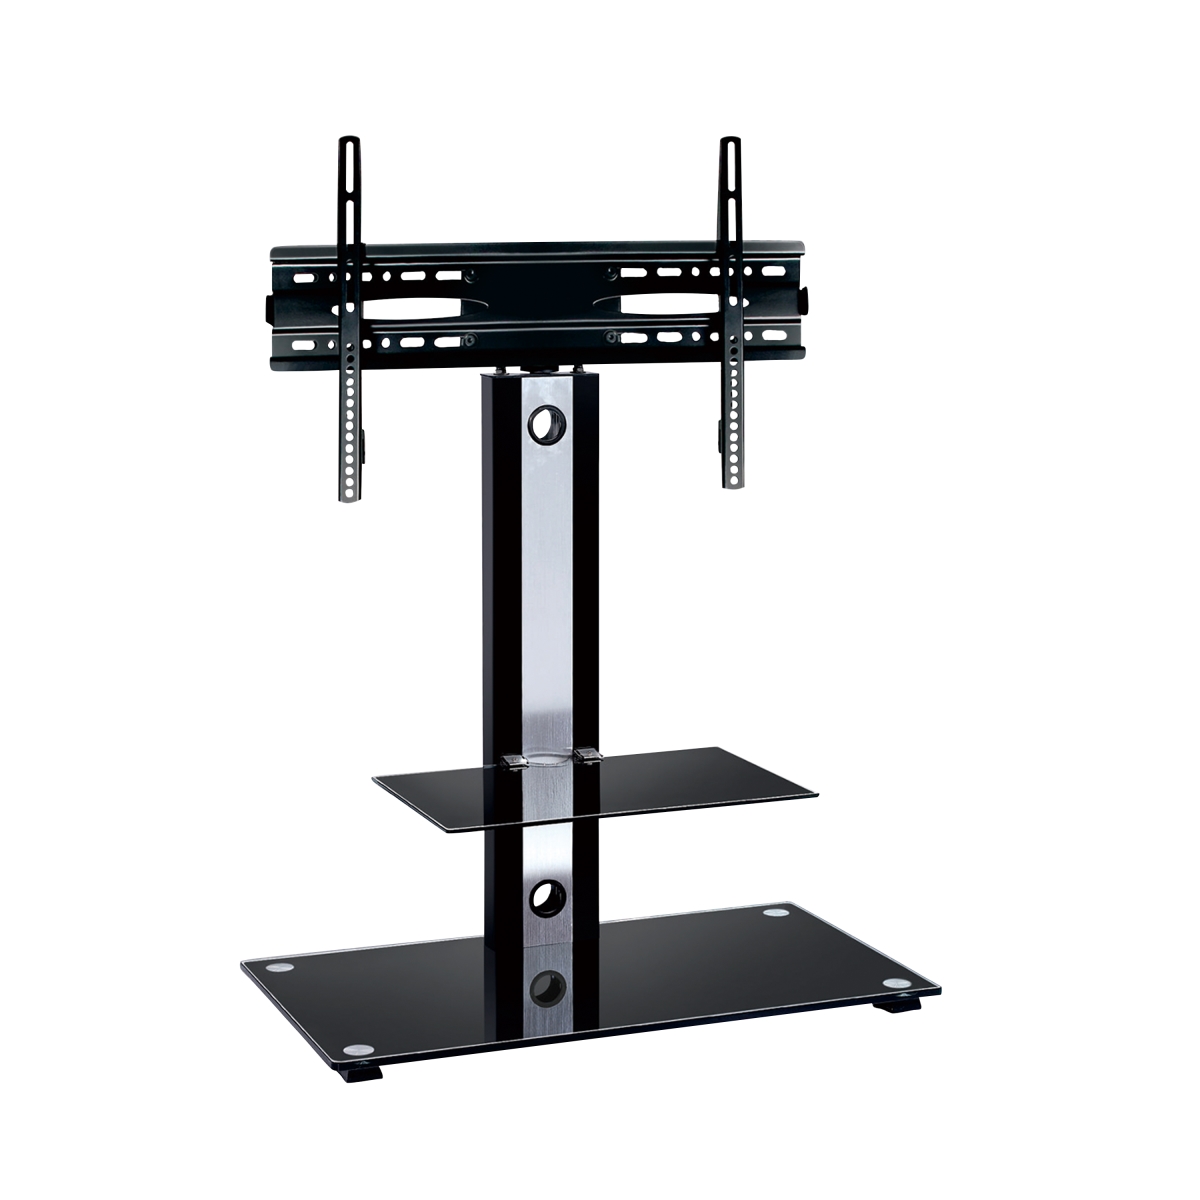 Lcd8222blk Tv Stand For 32-42 In. Flat Panel Tv, Black